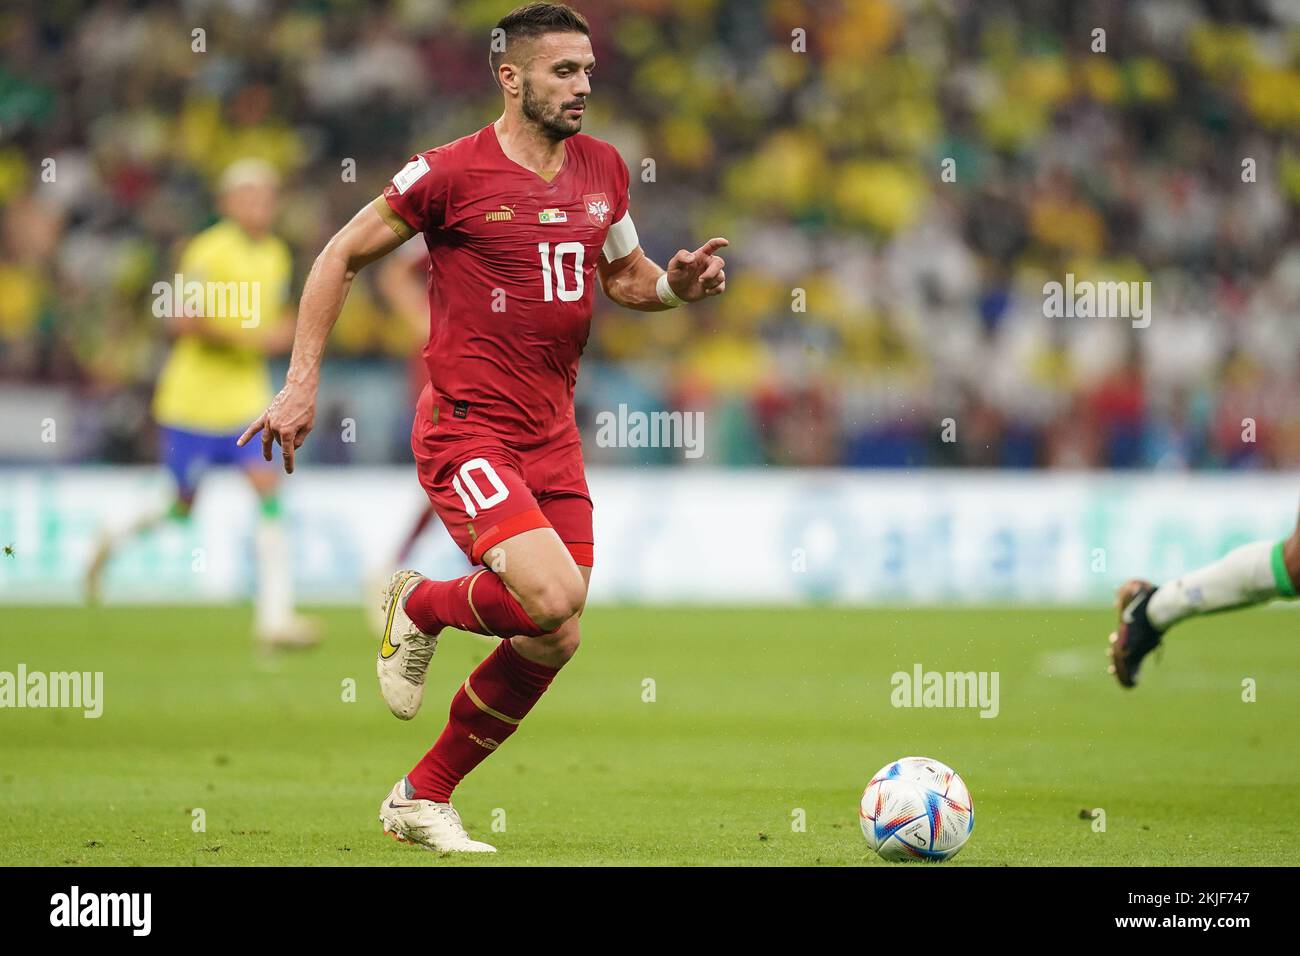 LUSAIL, QATAR - NOVEMBER 24: Player of Serbia Dusan Tadic drives the ball during the FIFA World Cup Qatar 2022 group G match between Brazil and Serbia at Lusail Stadium on November 24, 2022 in Lusail, Qatar. (Photo by Florencia Tan Jun/PxImages) Credit: Px Images/Alamy Live News Stock Photo